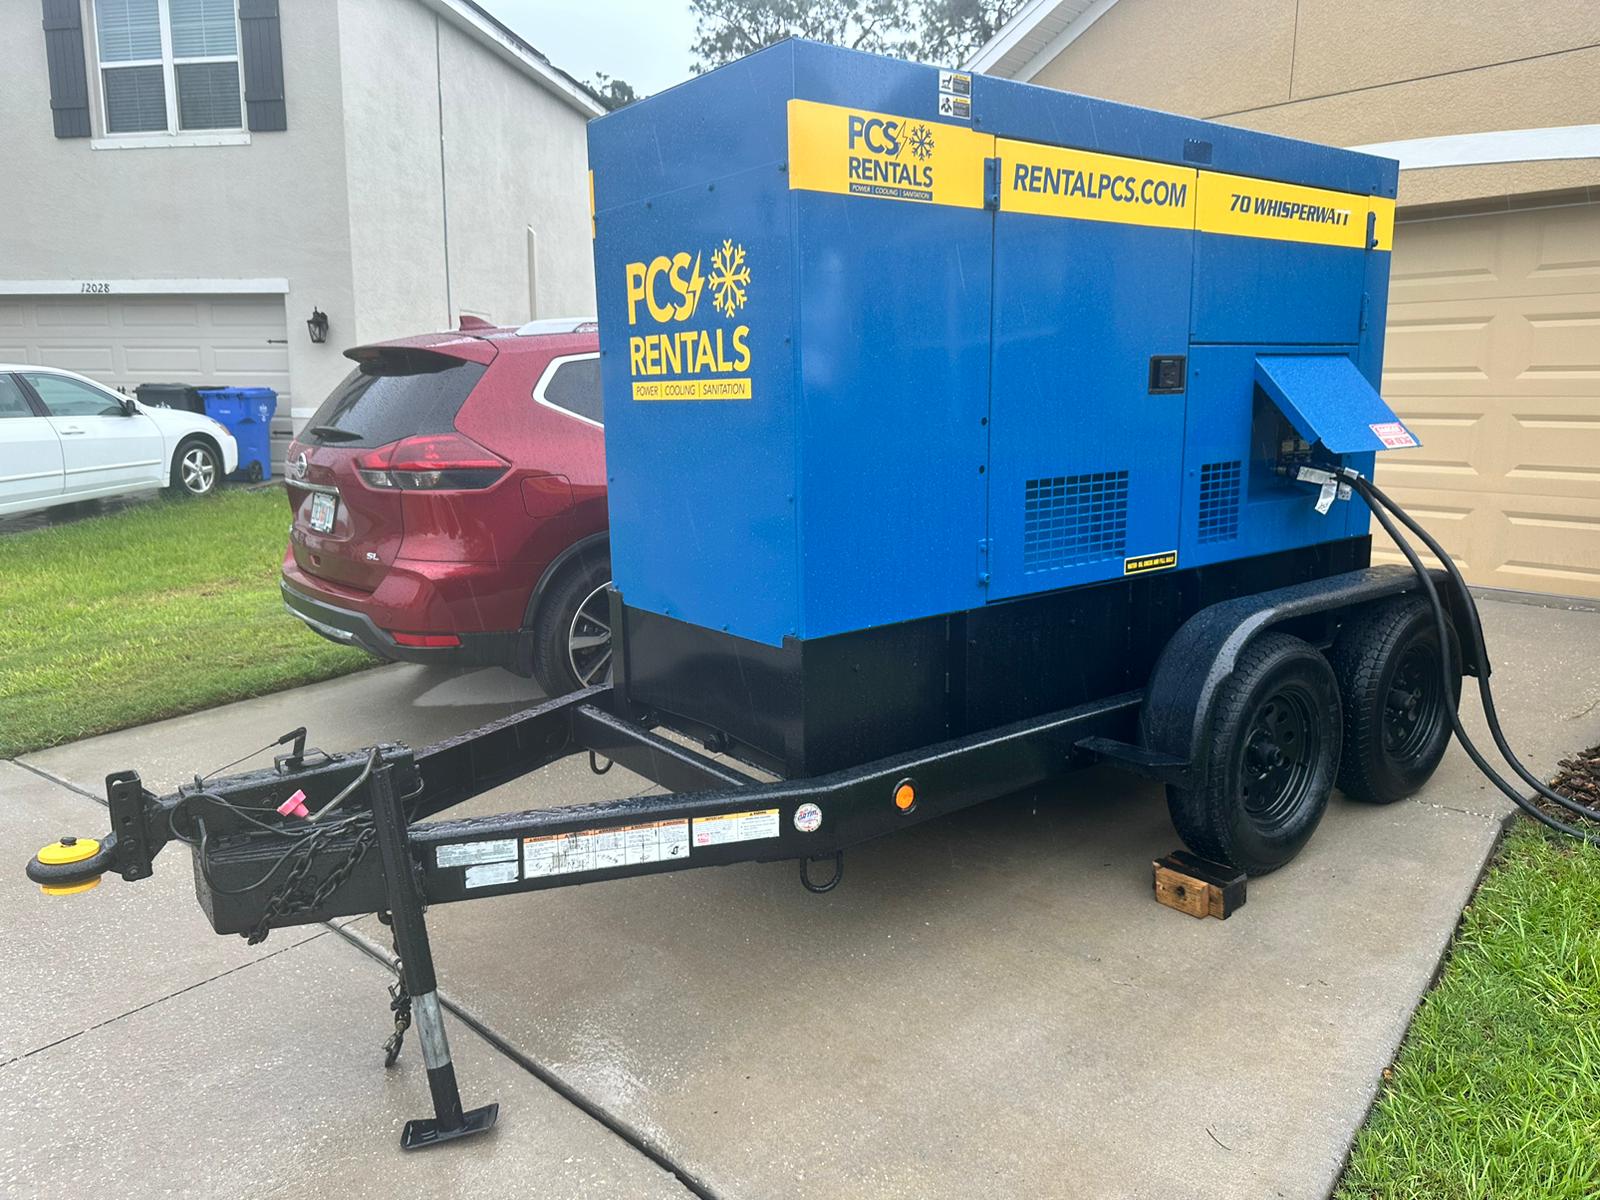 PCS Rentals offers reliable generator rentals in Tampa, FL. Perfect for events, construction, and emergencies. Contact us for power solutions!